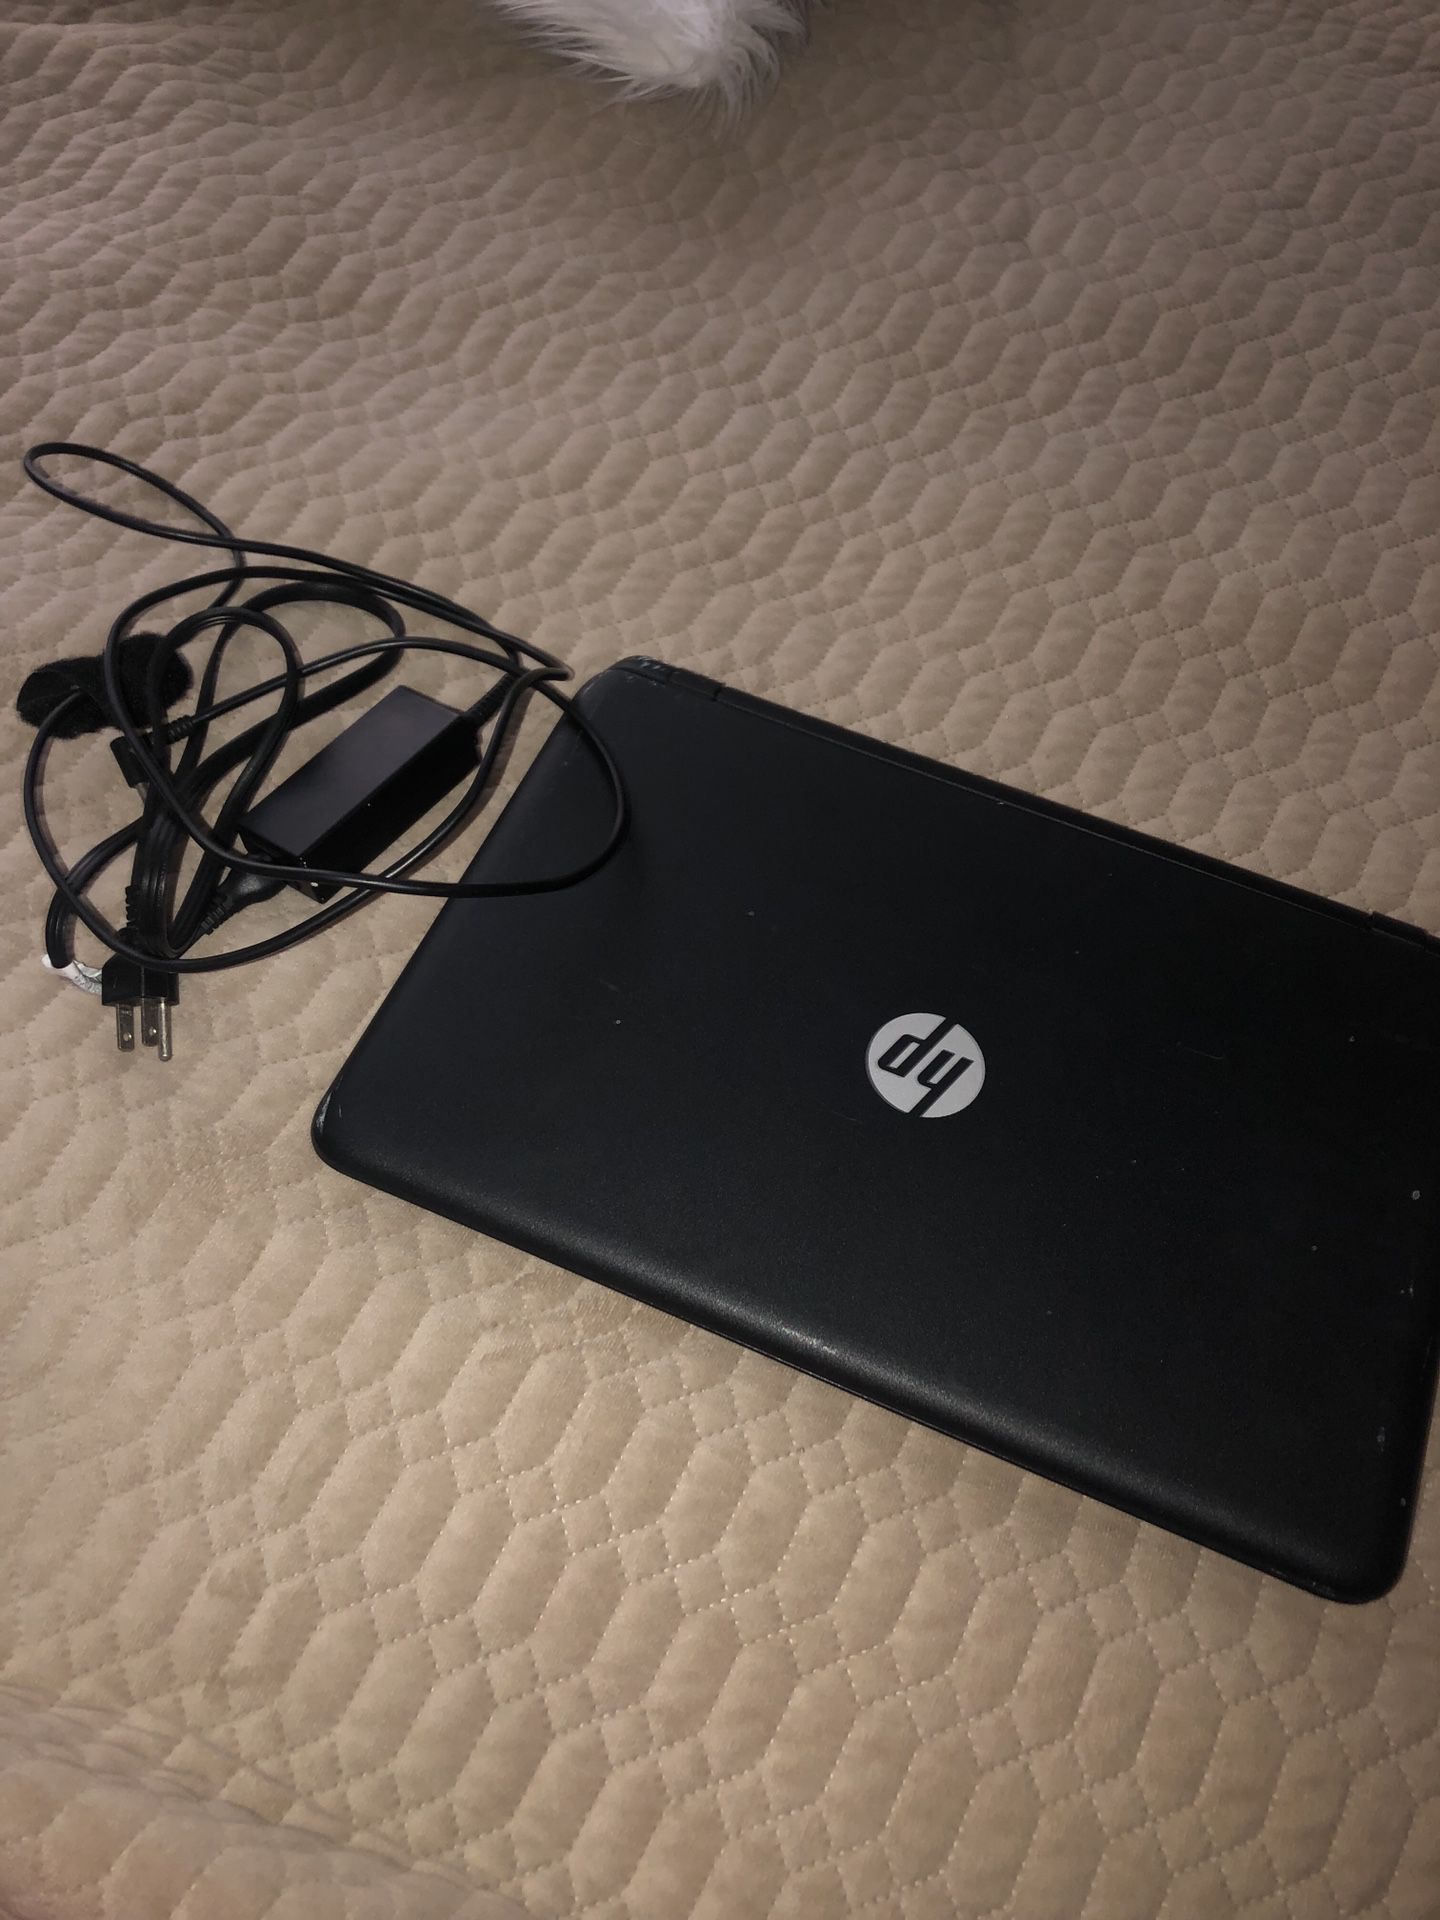 Hp laptop with touch screen